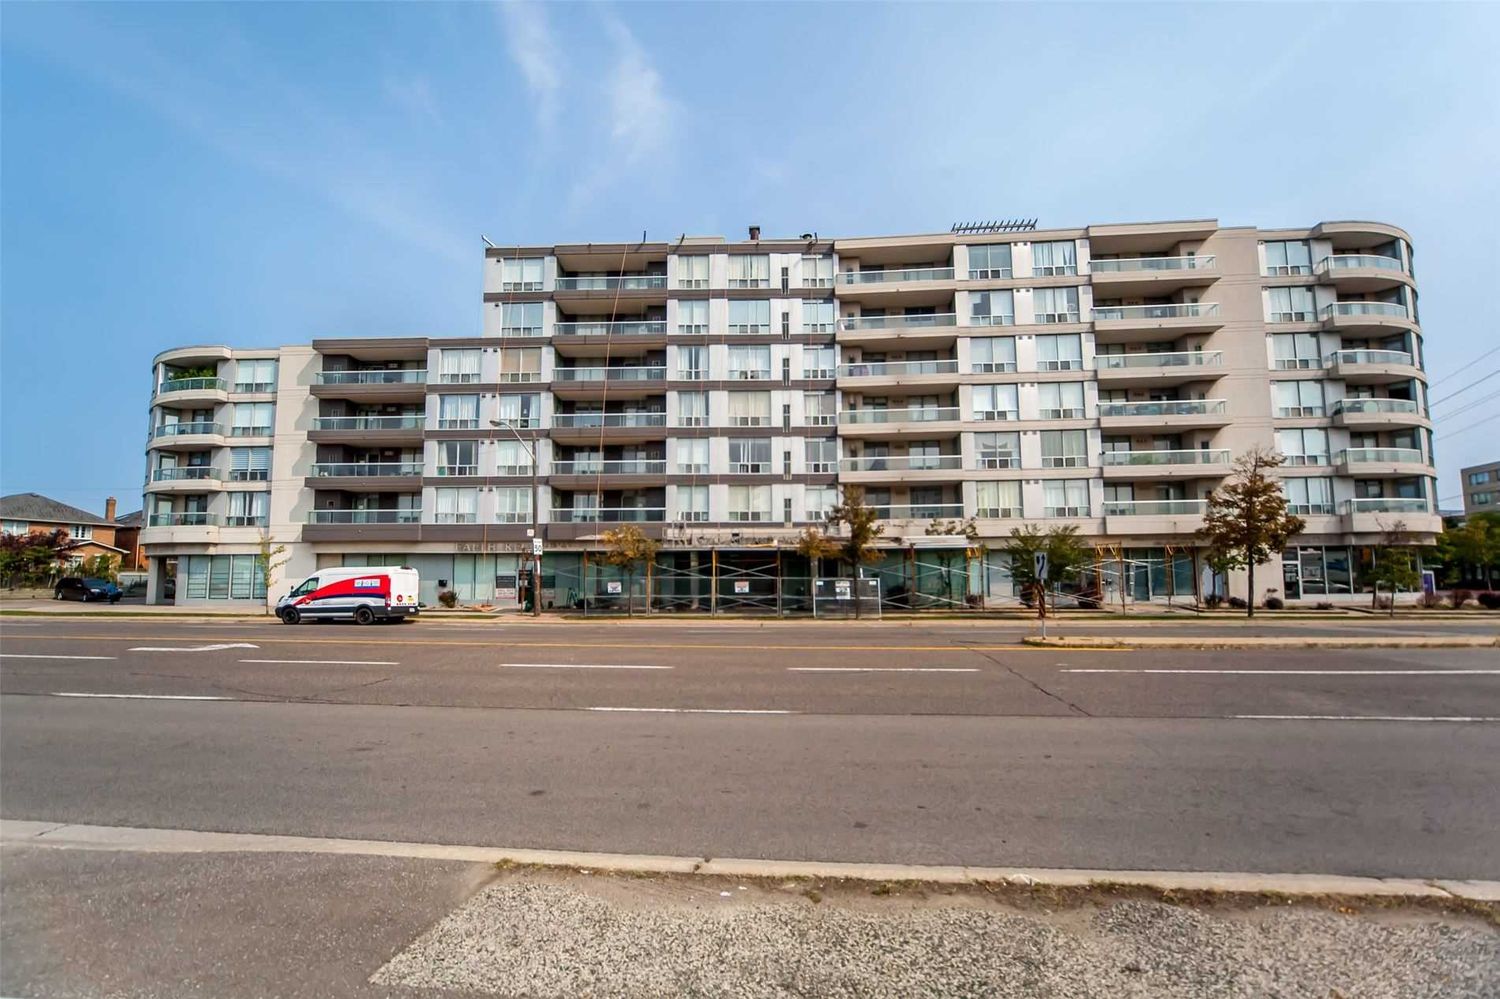 906 Sheppard Avenue W. Terrace Heights III Condos is located in  North York, Toronto - image #2 of 2